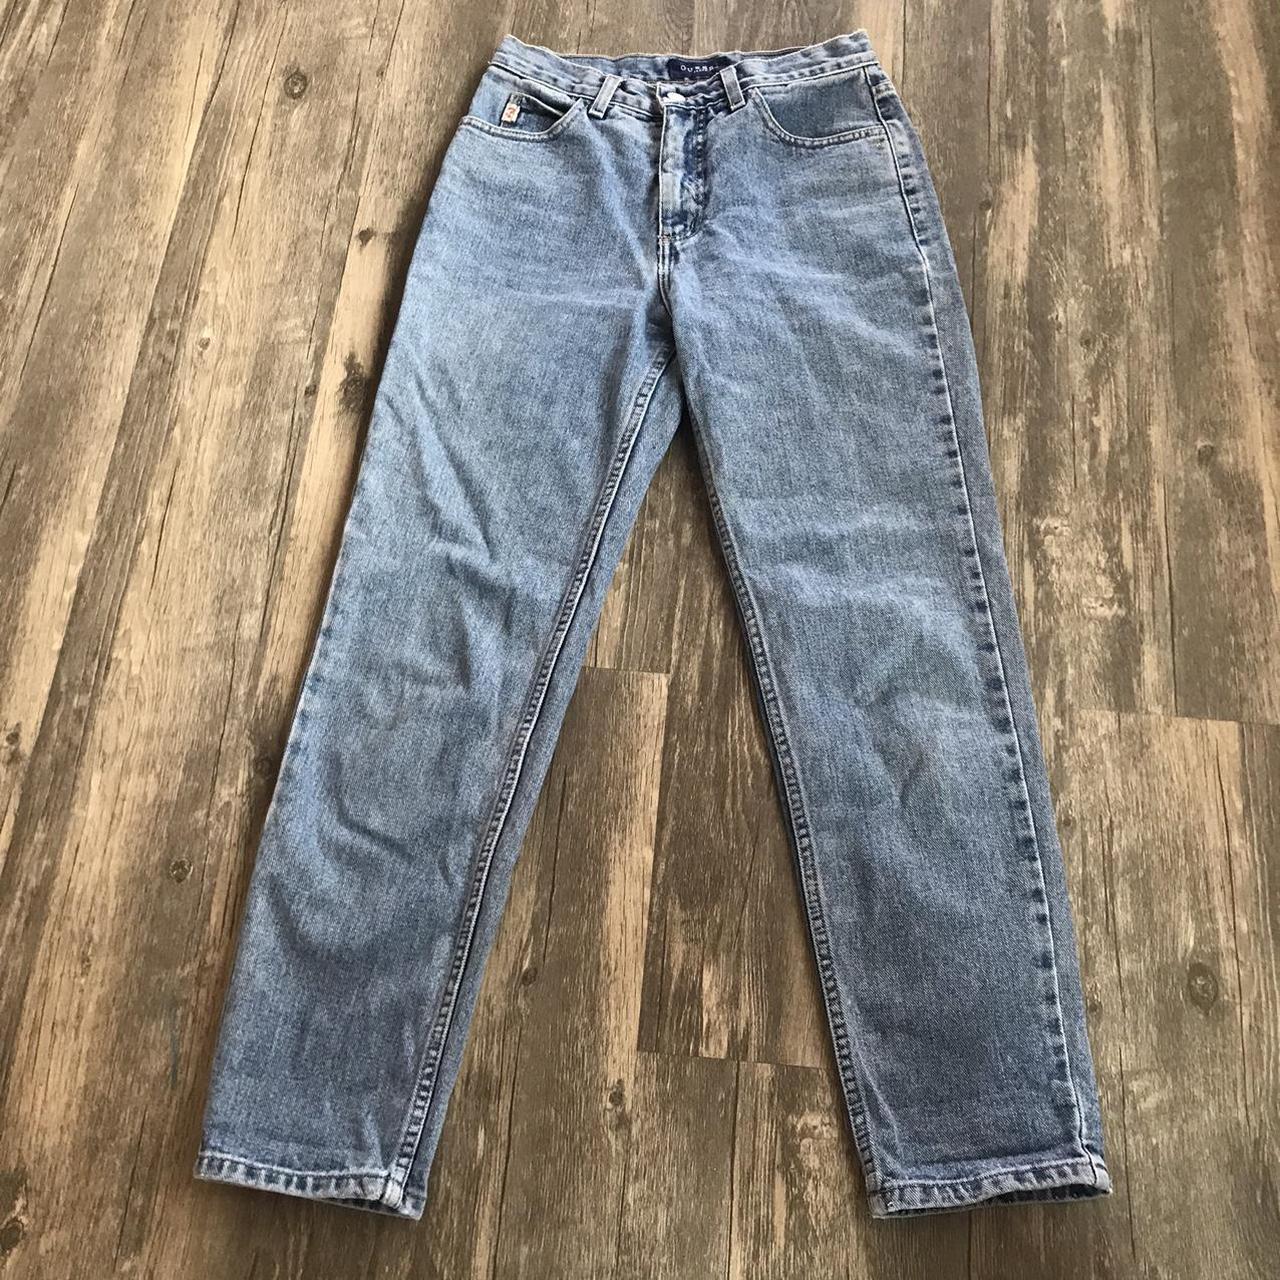 Guess Men's Blue and Navy Jeans